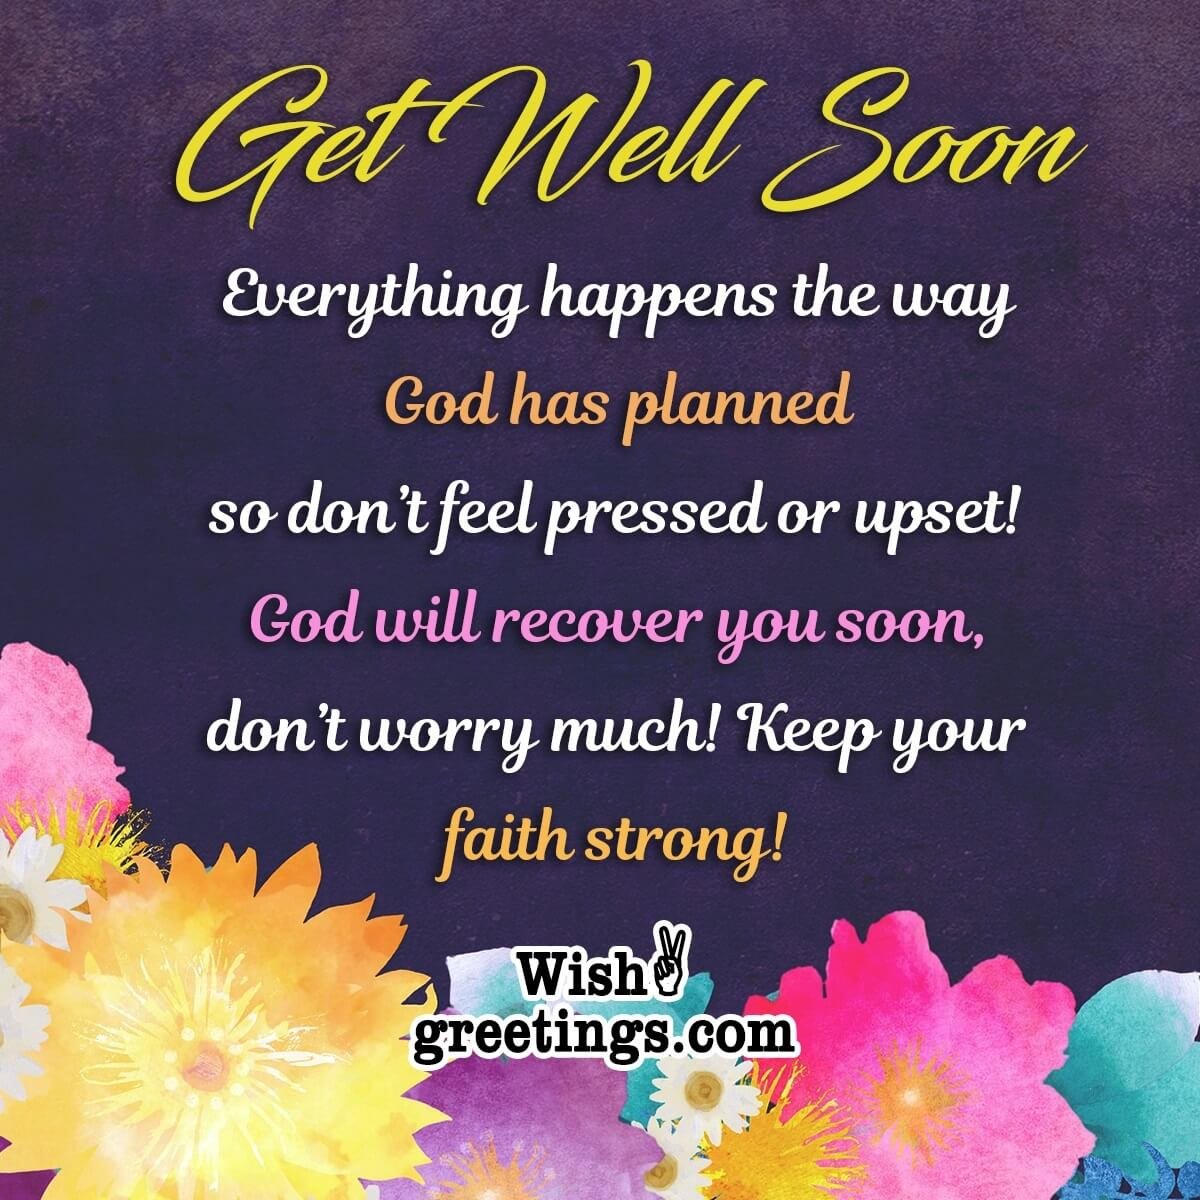 religious-get-well-soon-messages-wish-greetings